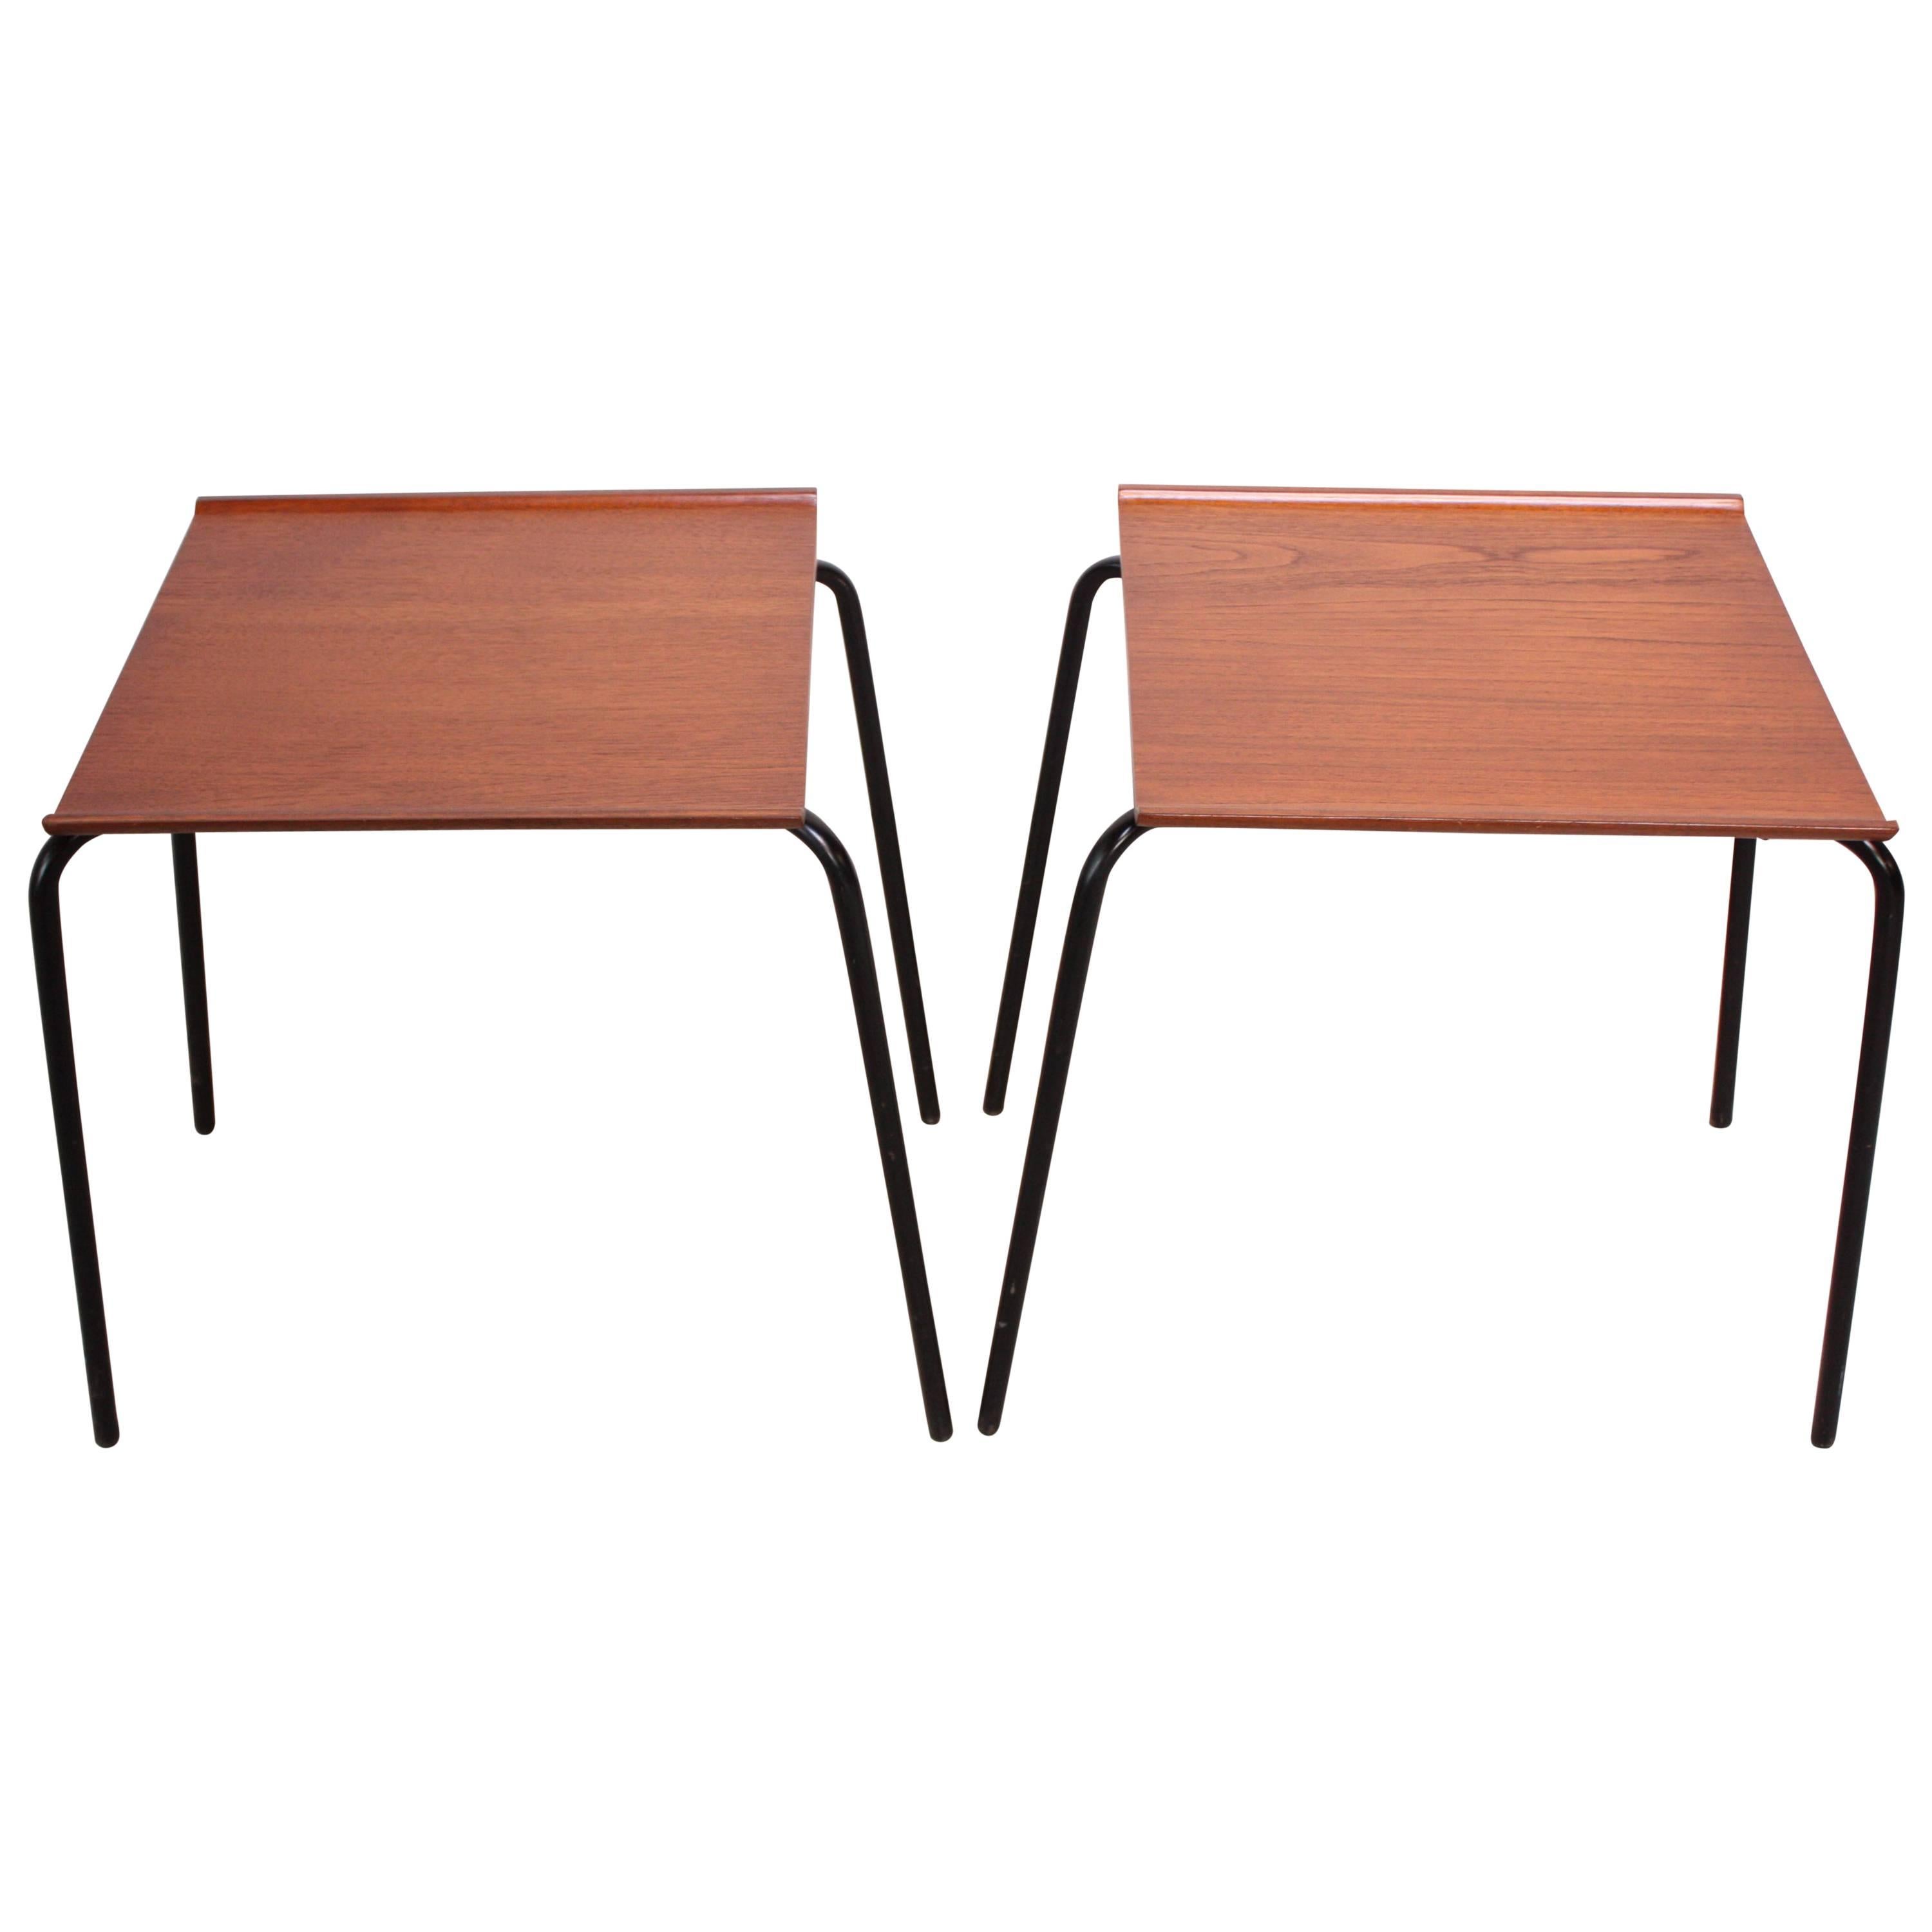 Pair of Danish Teak and Metal 'Stacking Tables' Attributed to Fritz Hansen